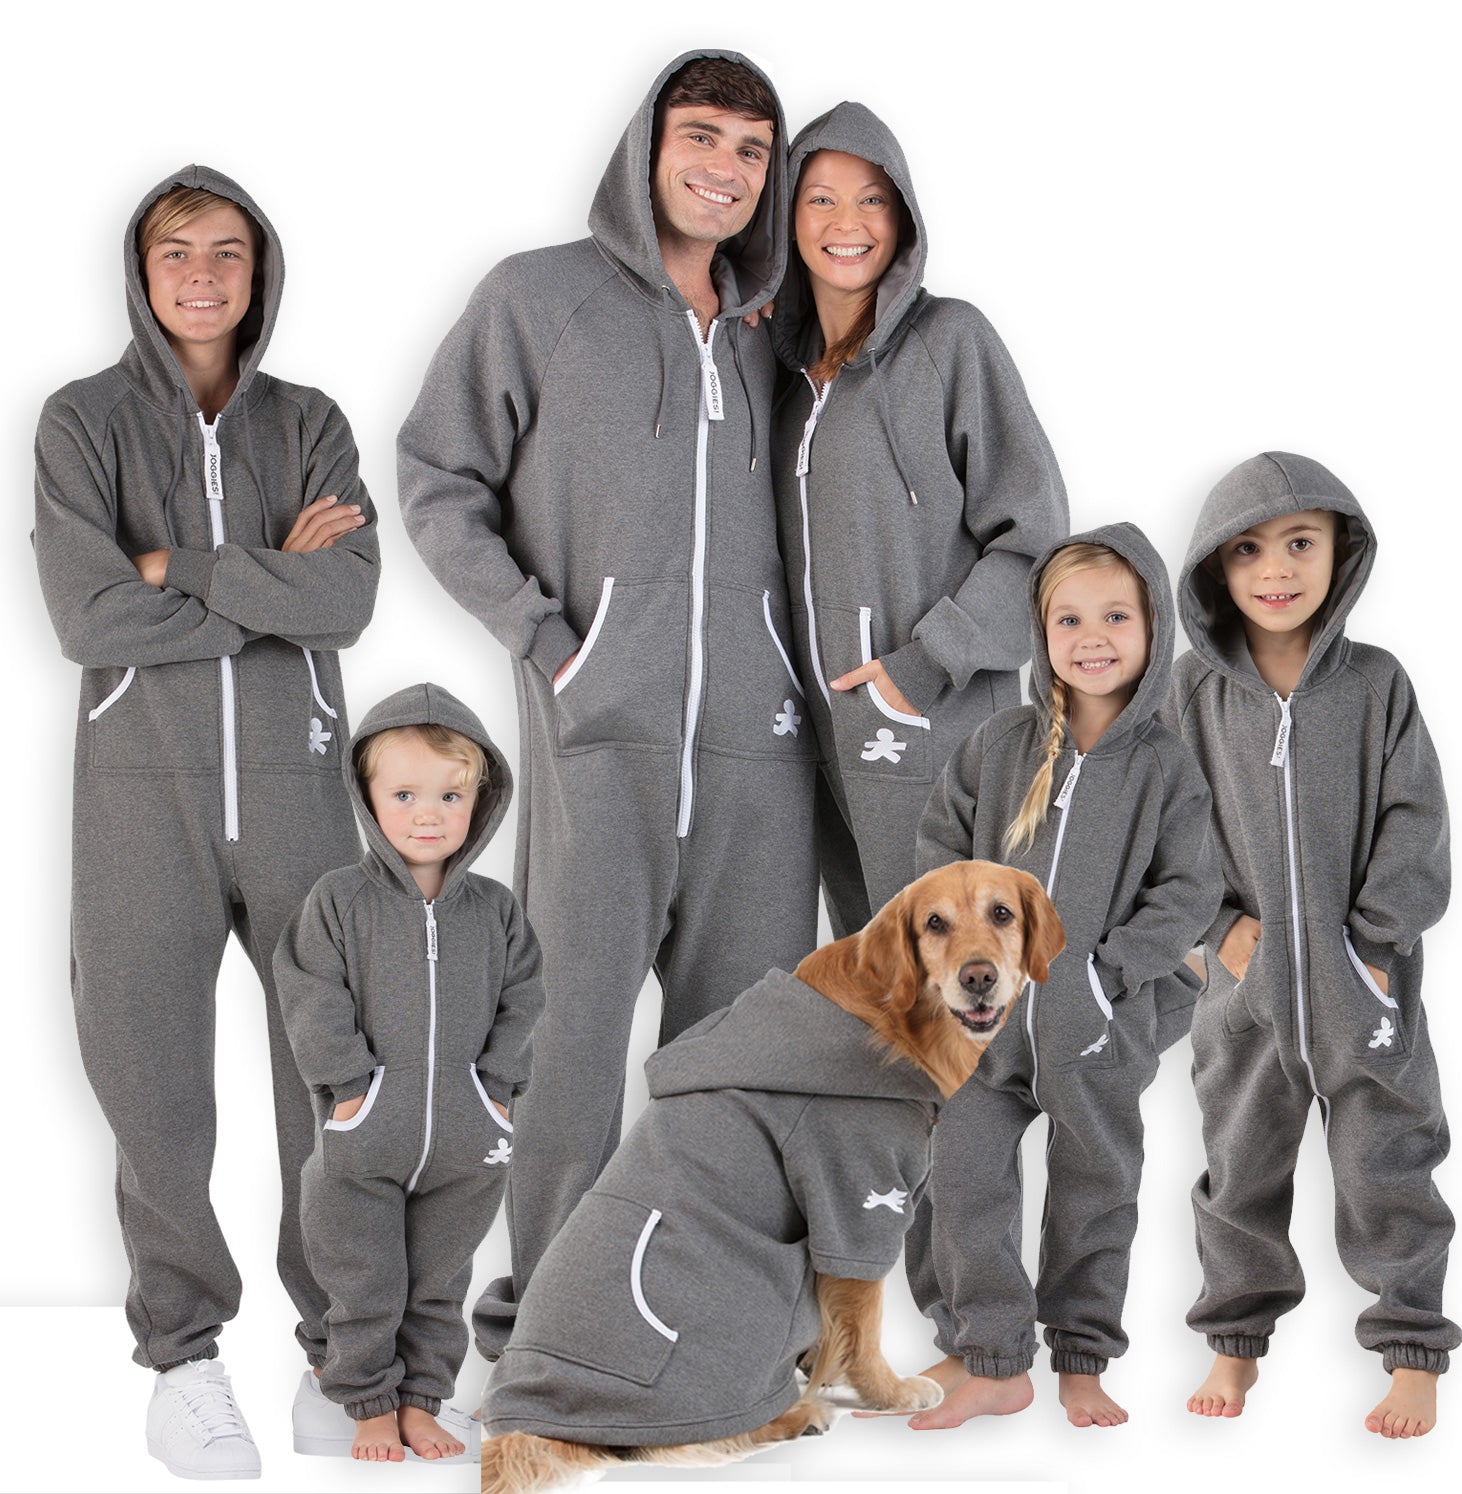  The Big Softy - Adult Onesie Pajamas for Women, Teddy Fleece Womens  Onesie Pajamas, Fuzzy Pajama Onesies for Women, Teens PJs (Small, Grey) :  Clothing, Shoes & Jewelry